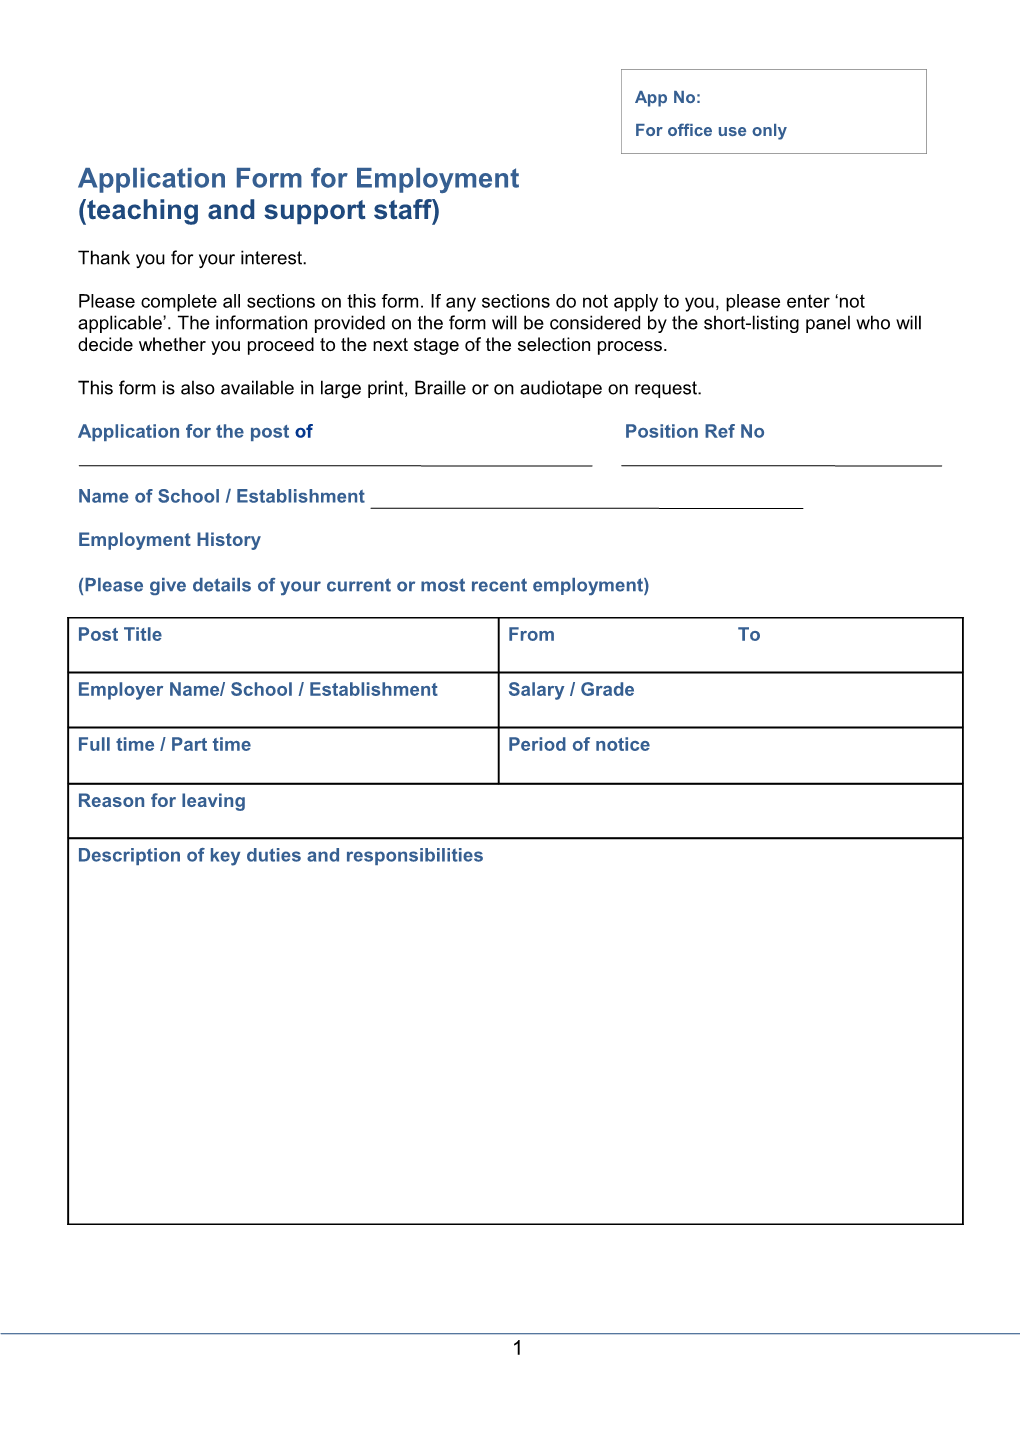 Application Form for Employment s2